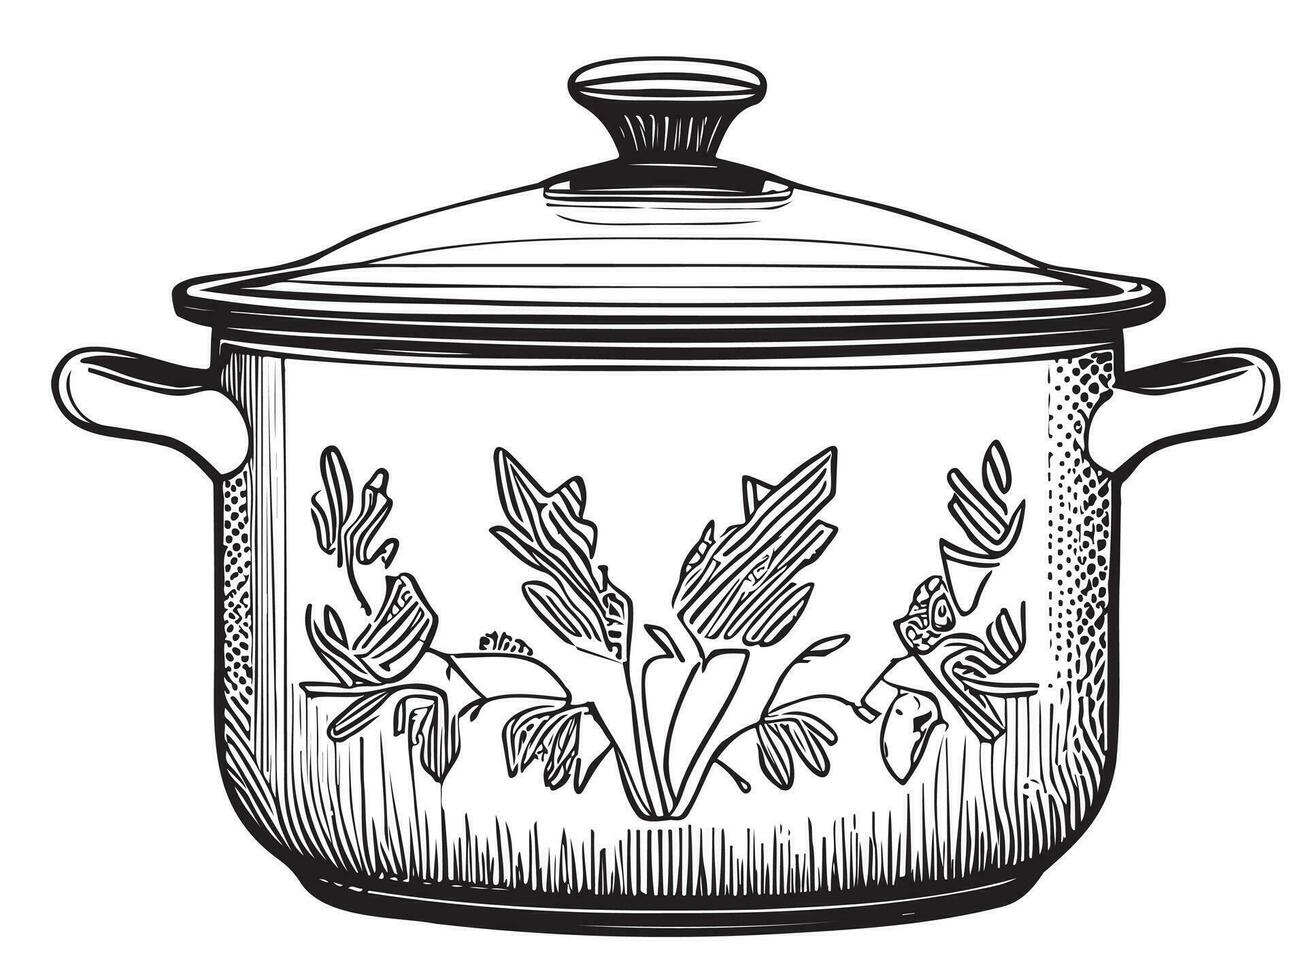 Pan with a lid scetch hand drawn in doodle vector illustration